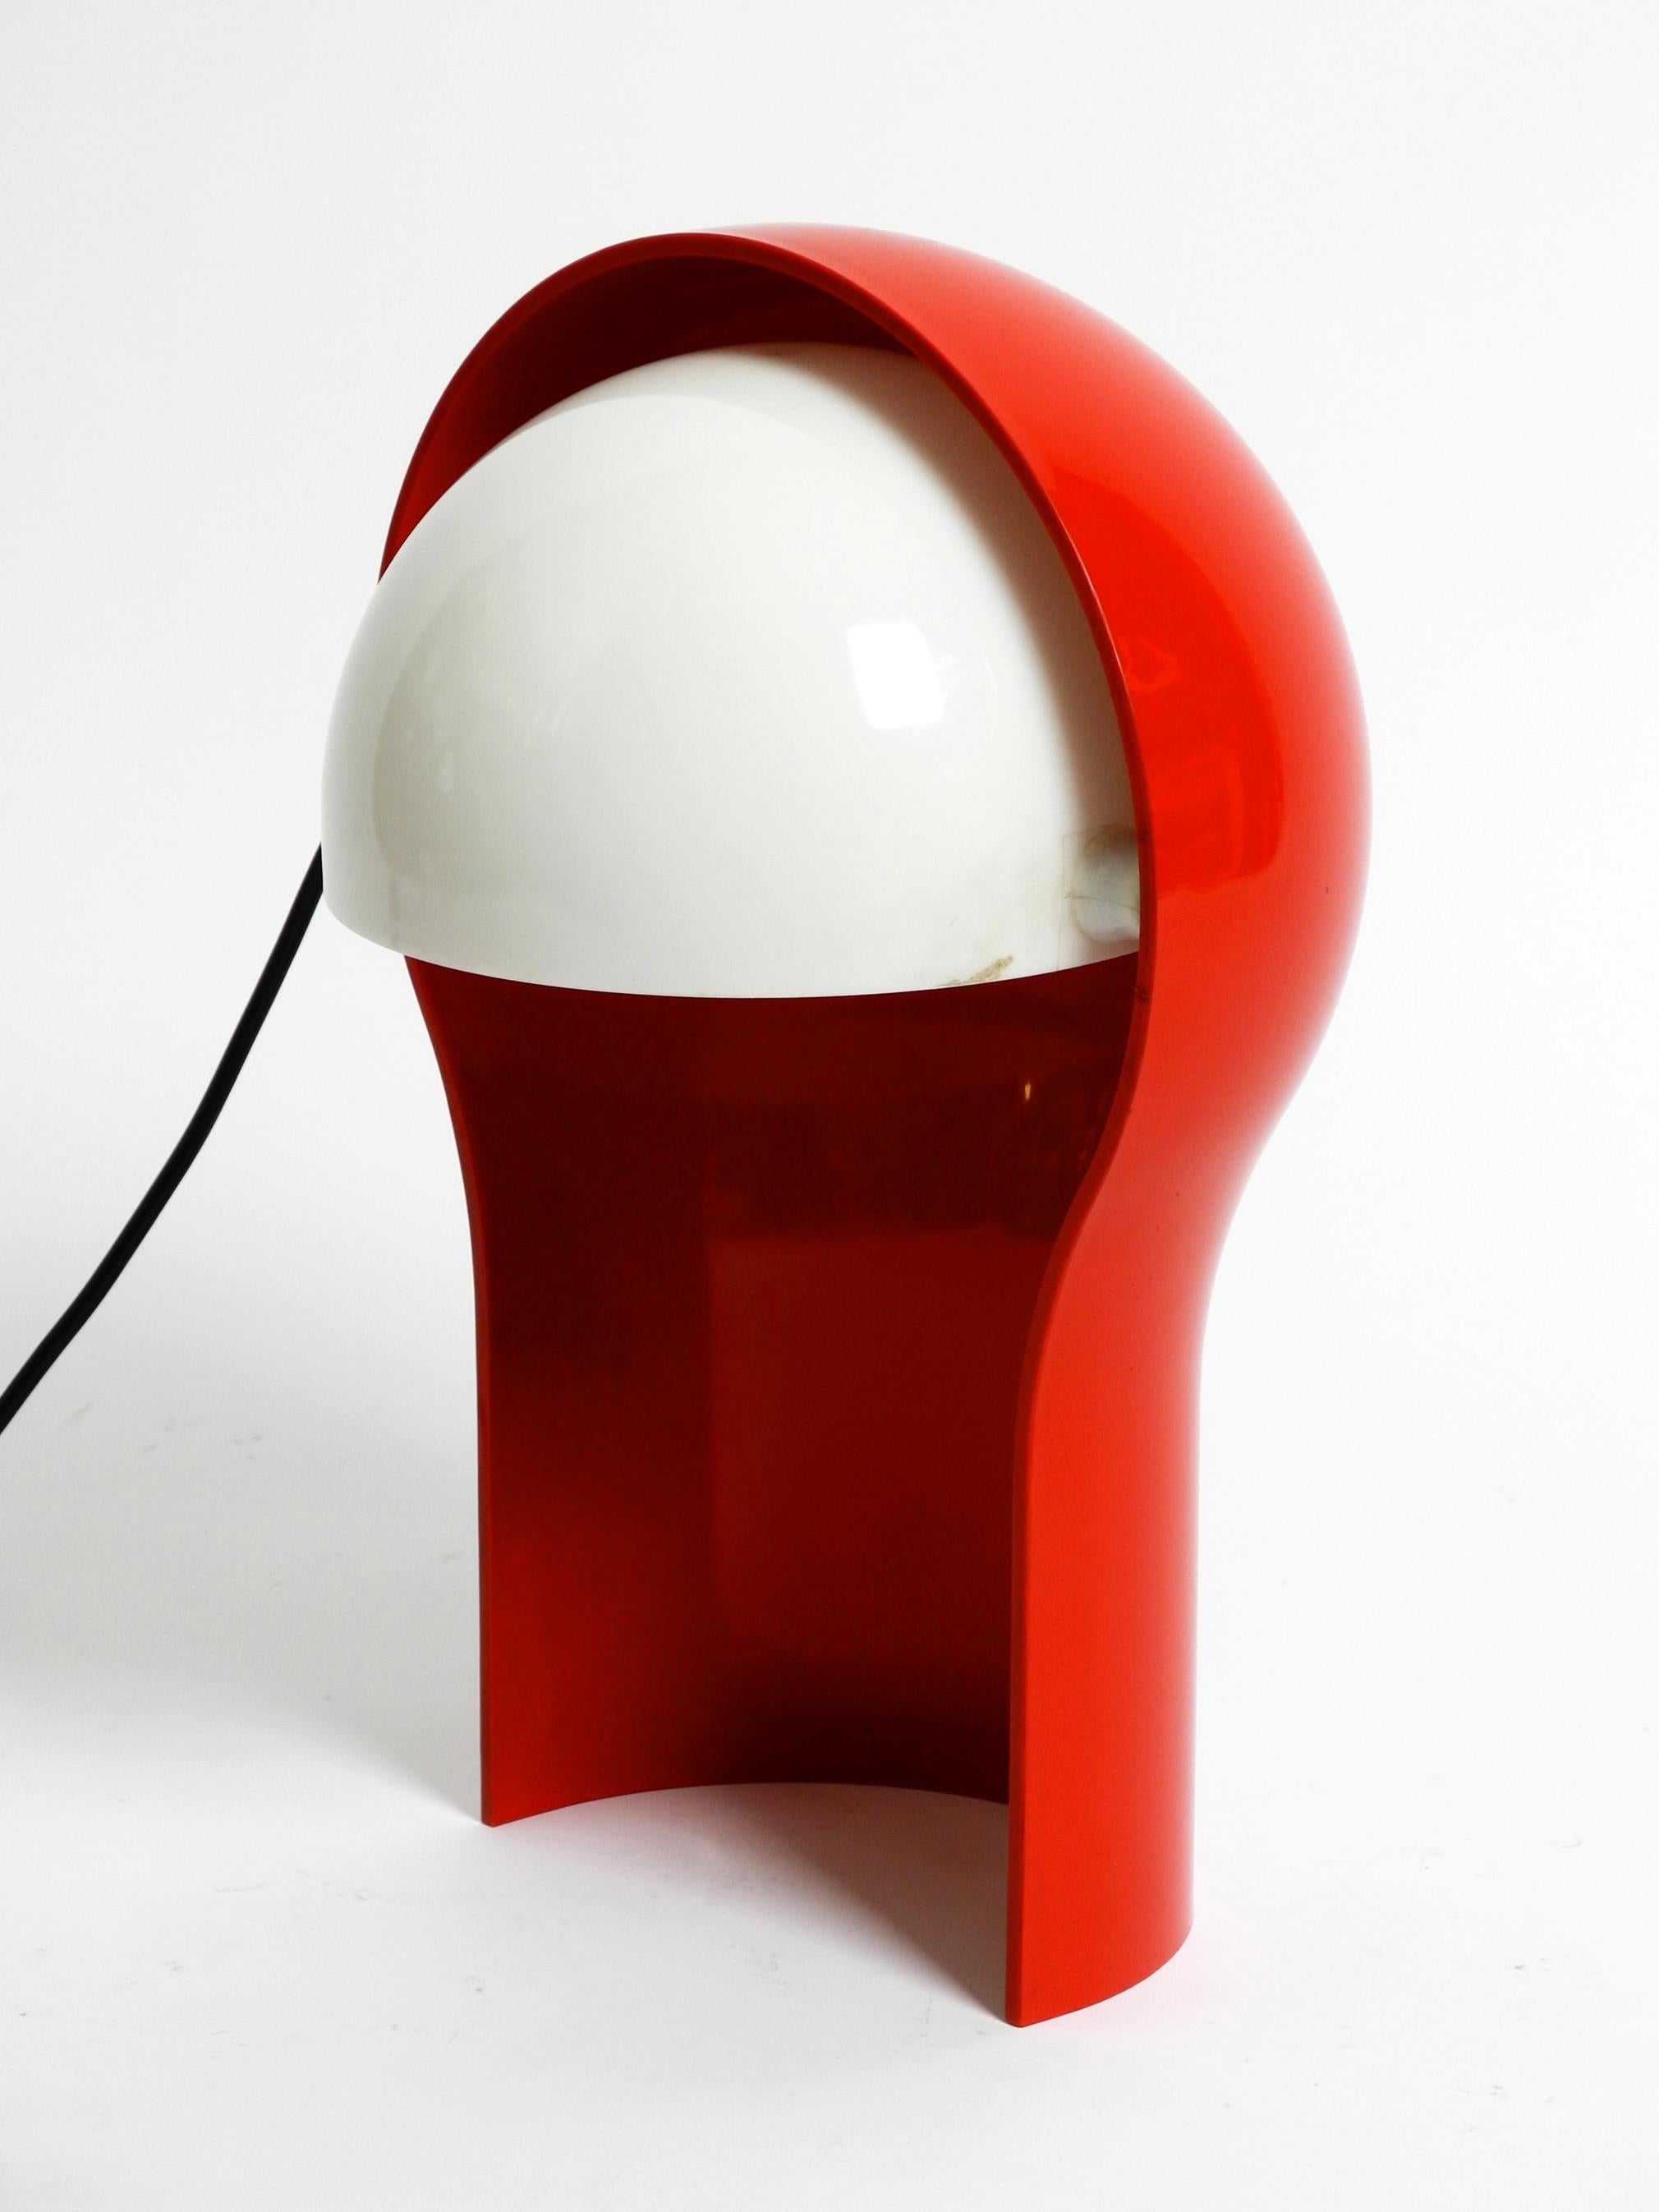 Telegono Table Lamp by Vico Magistretti for Artemide 1968 in Very Good Condition For Sale 4